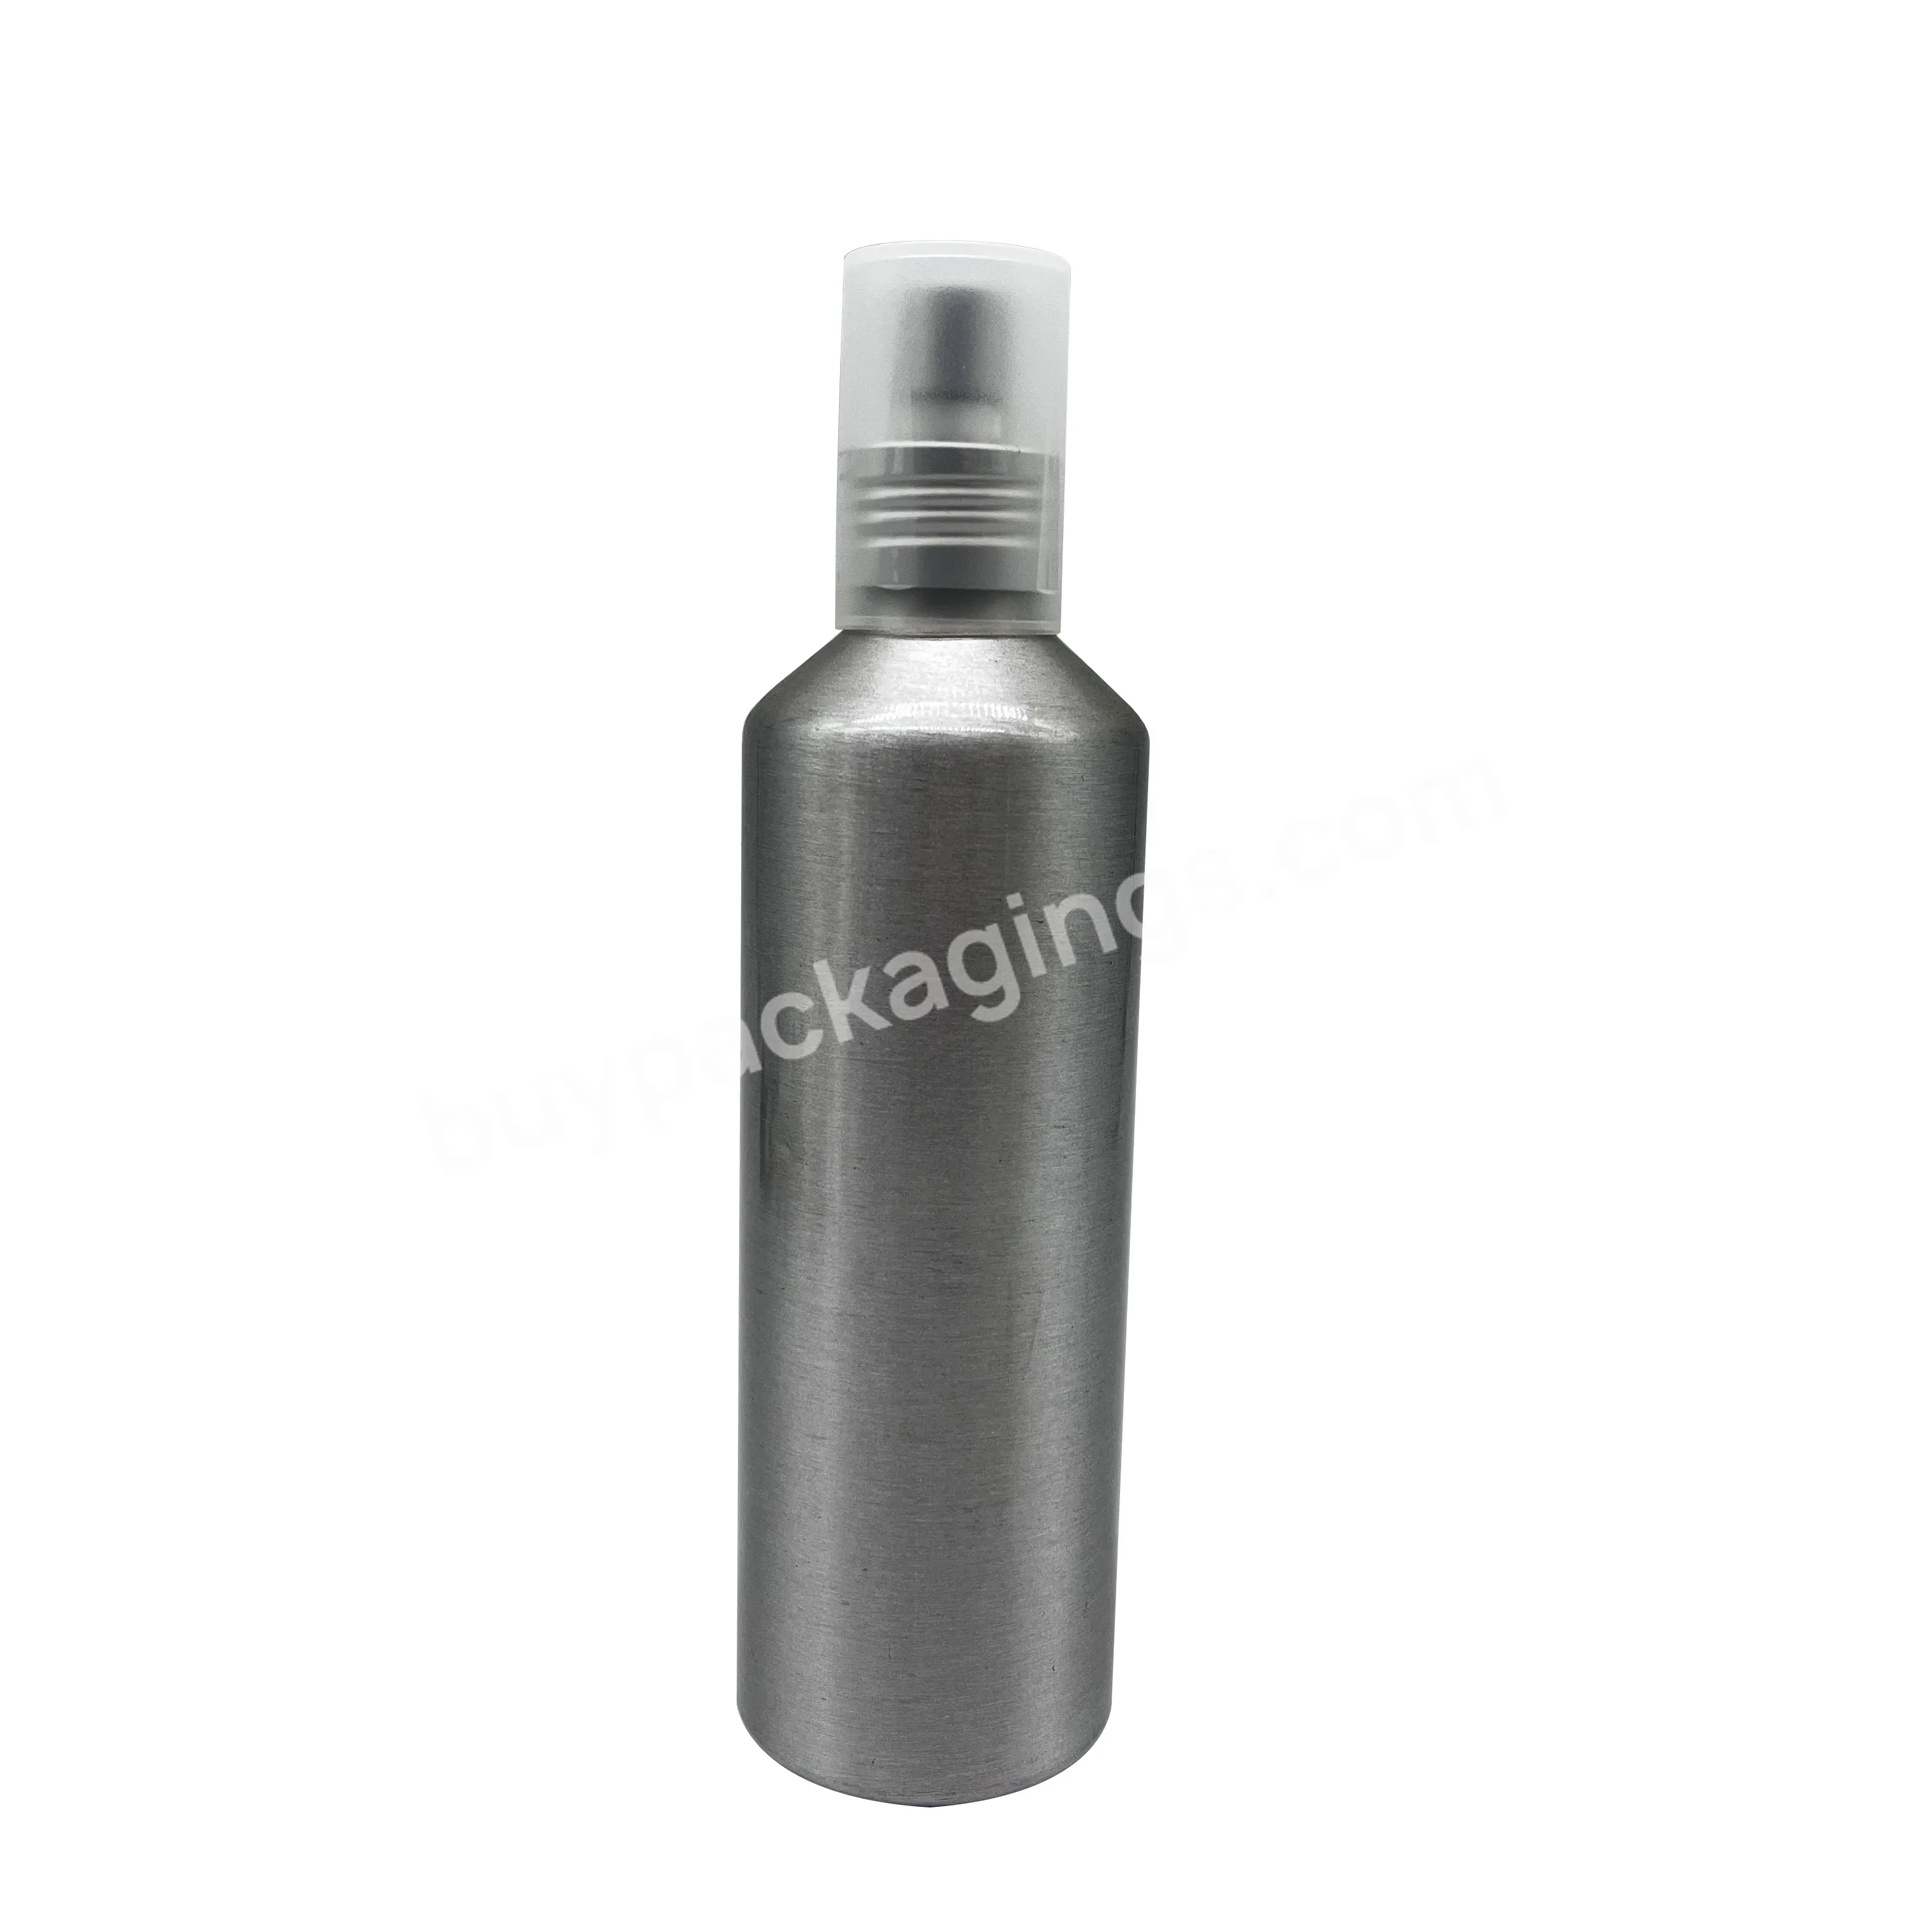 200ml Perfume Bottle Aluminum Alloy Bottle With Aluminum Thread Screw Mist Sprayer Top With Clear Frost Big Cover Cap - Buy 200ml Silver Aluminum Bottles,Empty Aluminum Perfume Sprayer Bottle 6oz,Decorative Aluminum Sprayer Pump Bottles.